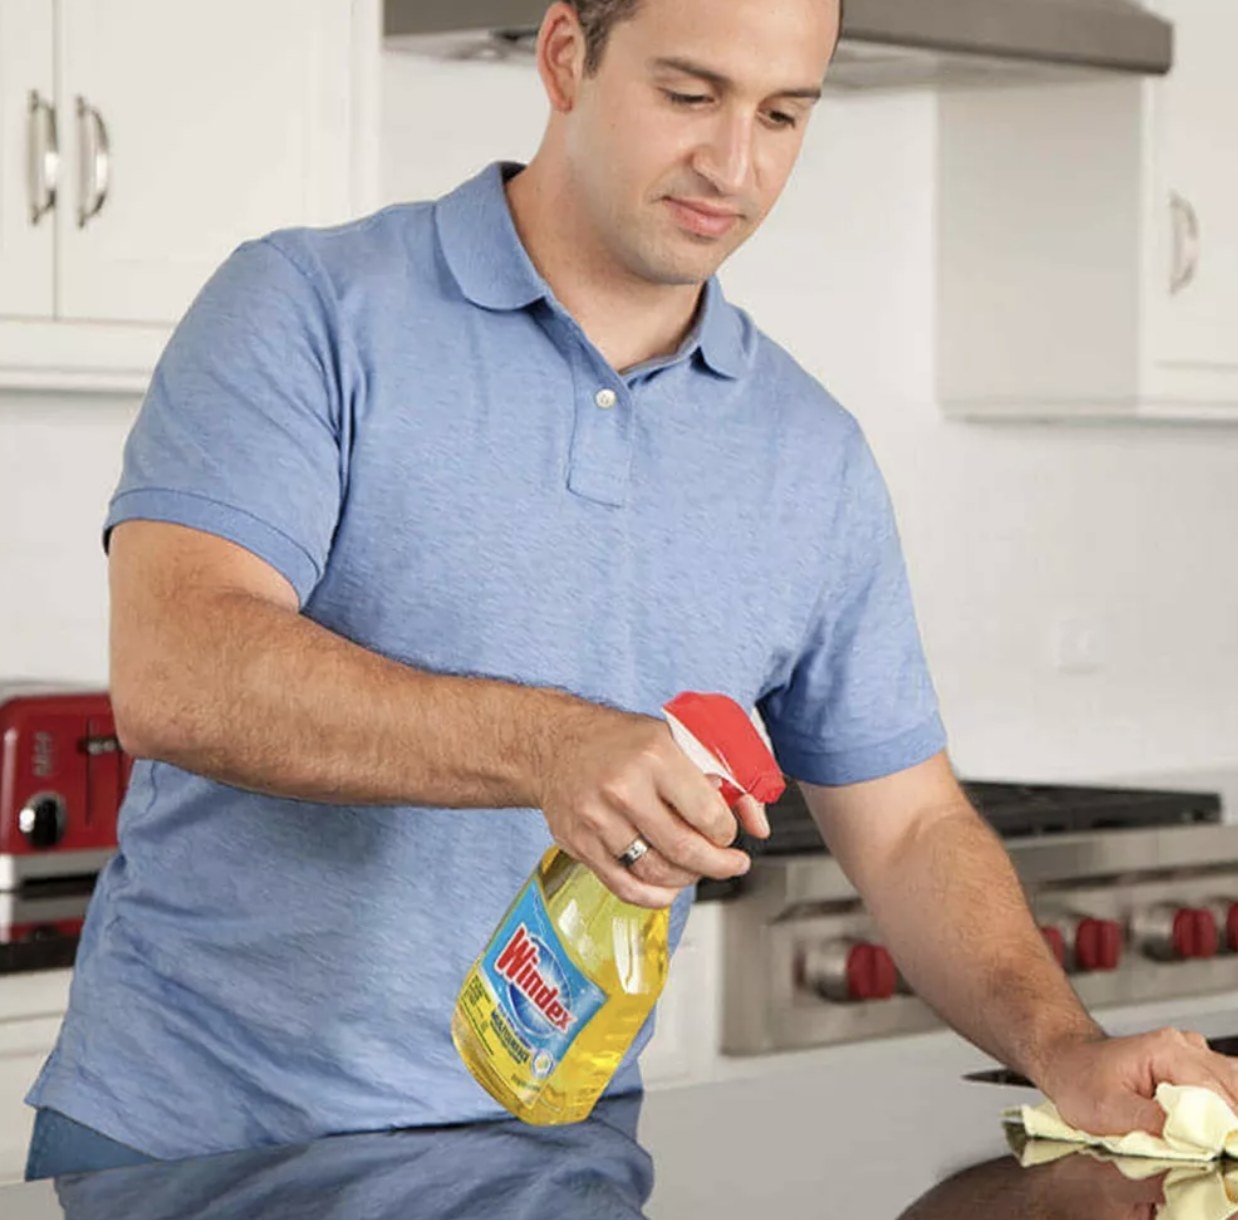 A person in a blue shirt using a yellow surface spray